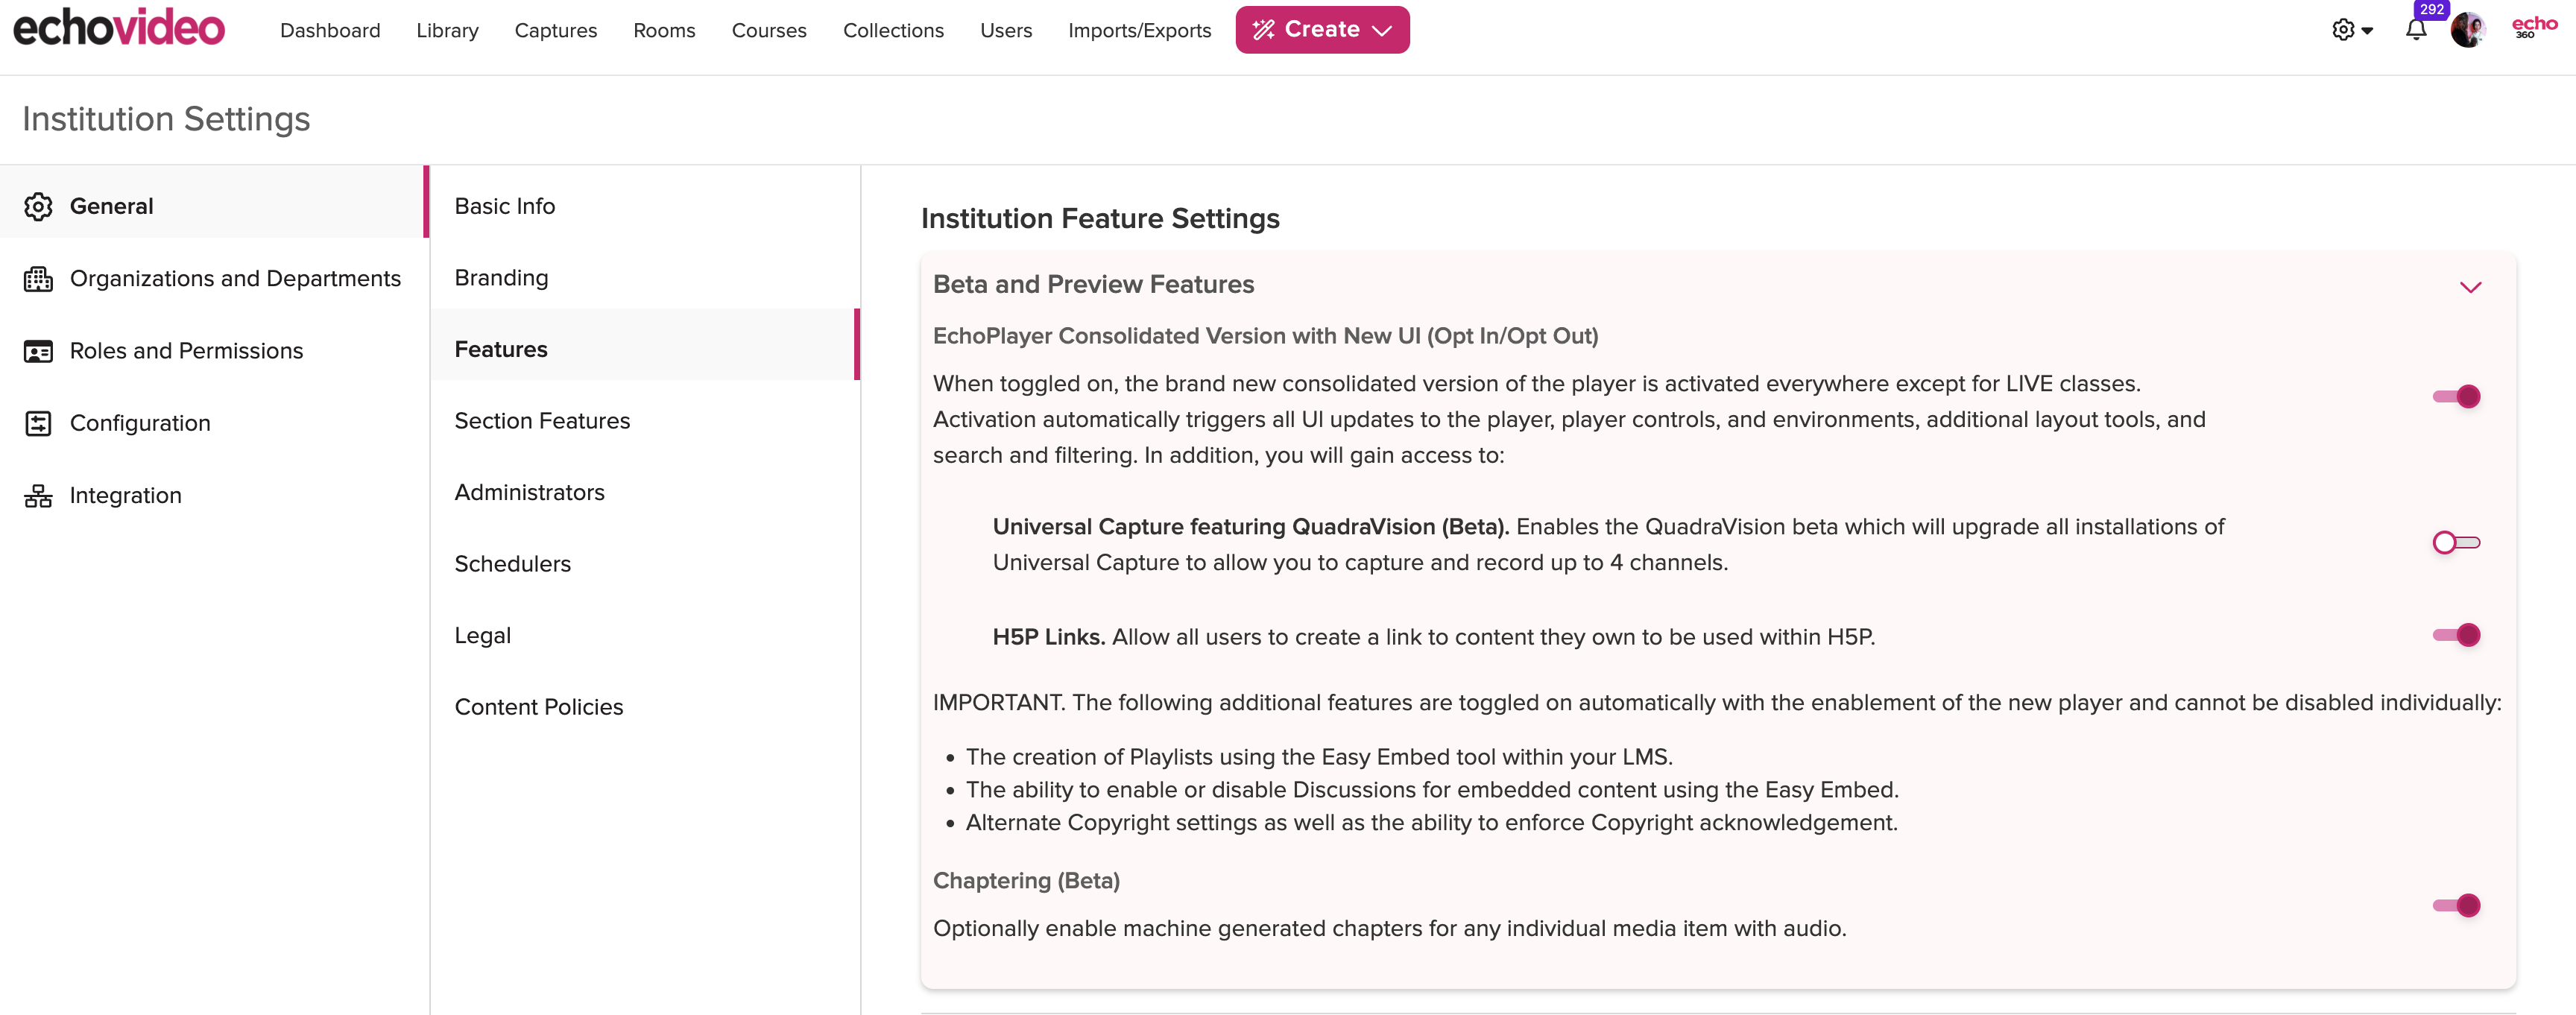 Institution Features showing available Beta and Preview Features